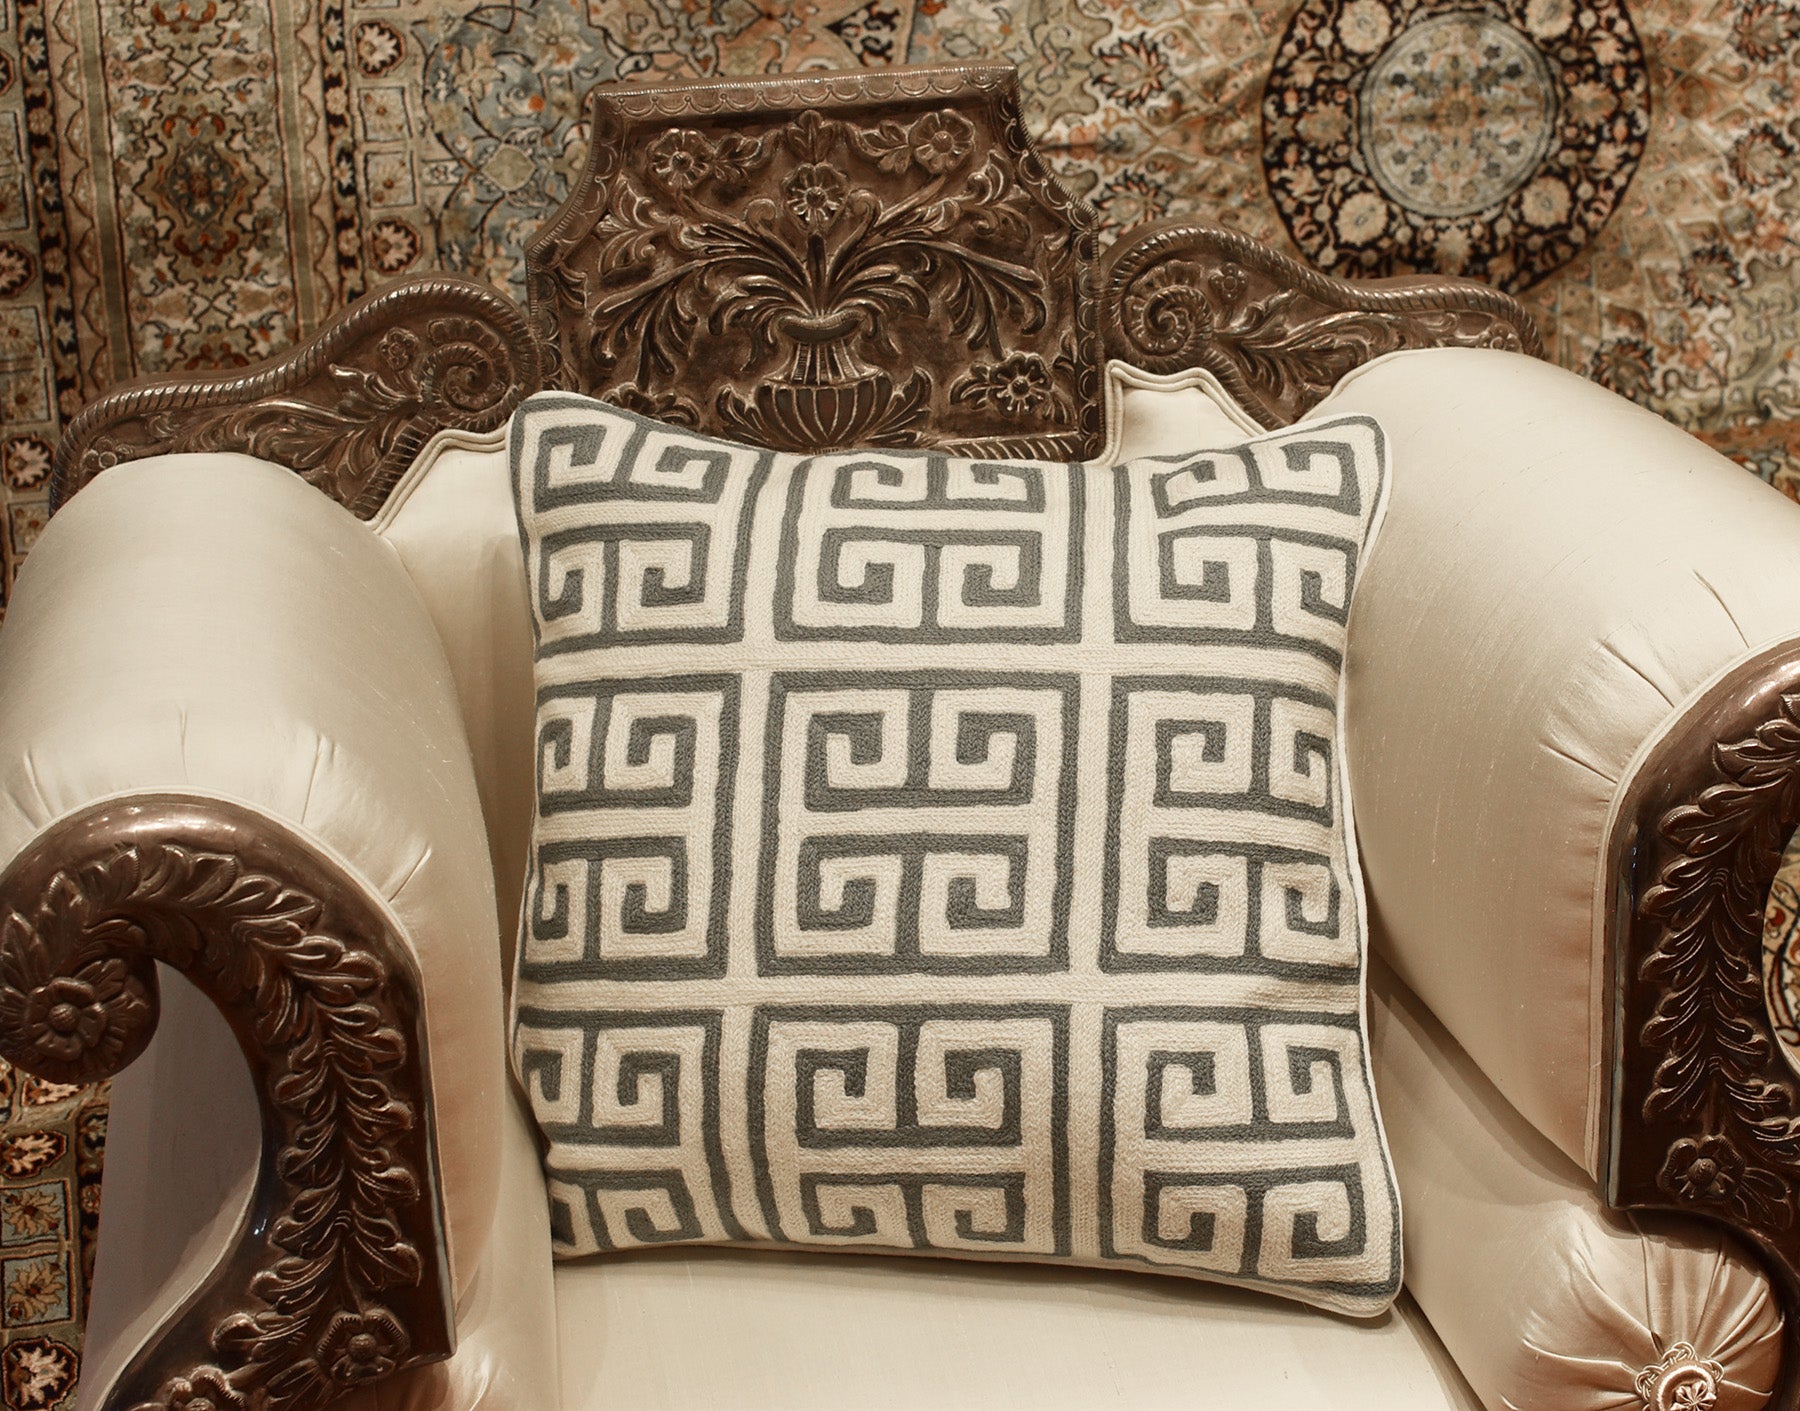 11 colors Black Greek Key Pillow Cover Decorative Throw Pillow Cover with  Off White Grosgrain-Cushion Covers-Geometric-18x18,20x20,22x22 451